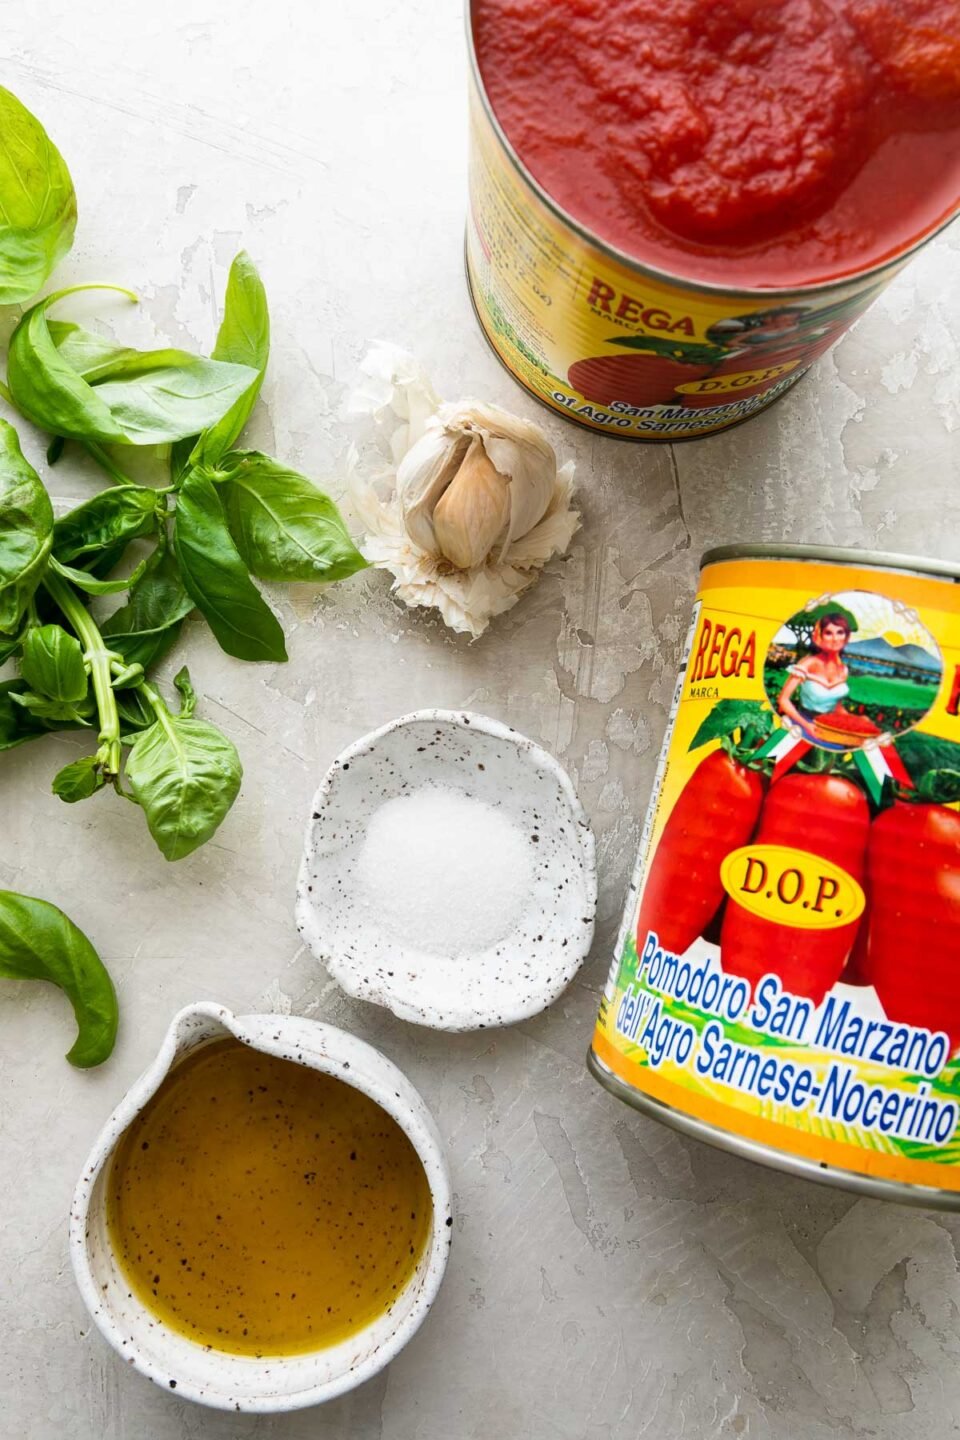 Simple San Marzano Tomato Sauce ingredients arranged on a creamy white textured surface: whole peeled San Marzano tomatoes, extra virgin olive oil, garlic, fresh basil, granulated sugar, kosher salt and ground black pepper, and optional crushed red pepper.